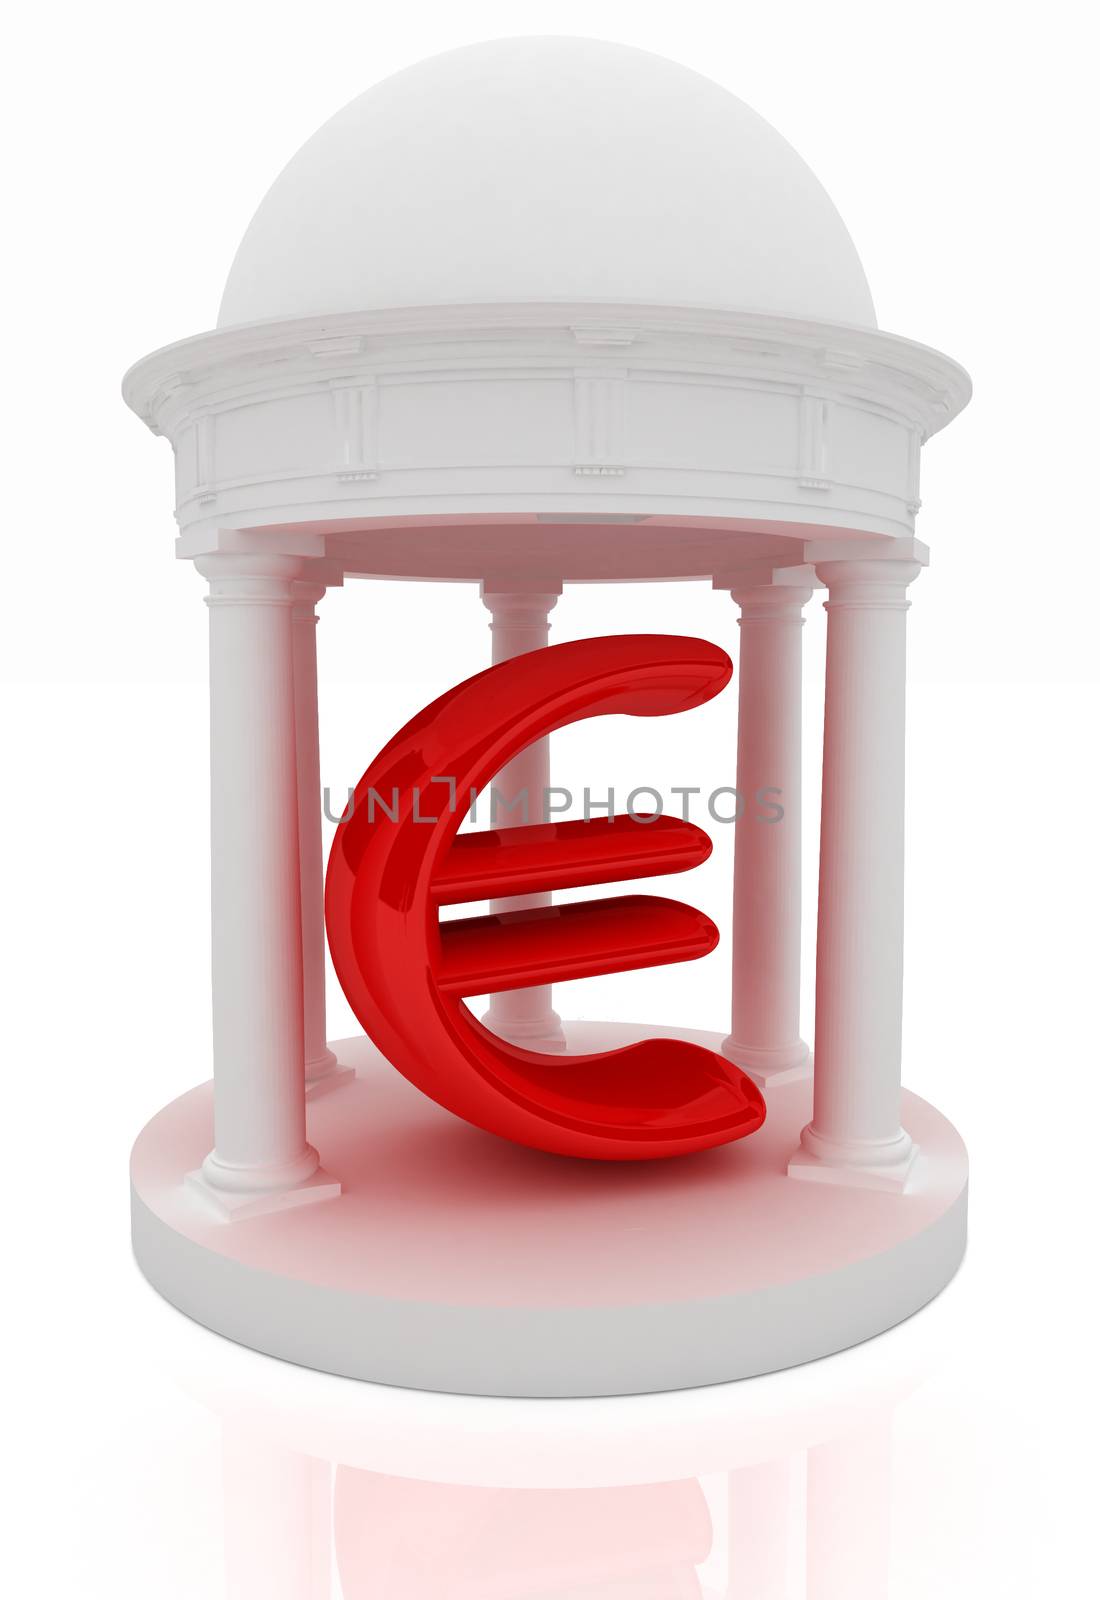 Euro sign in rotunda on a white background